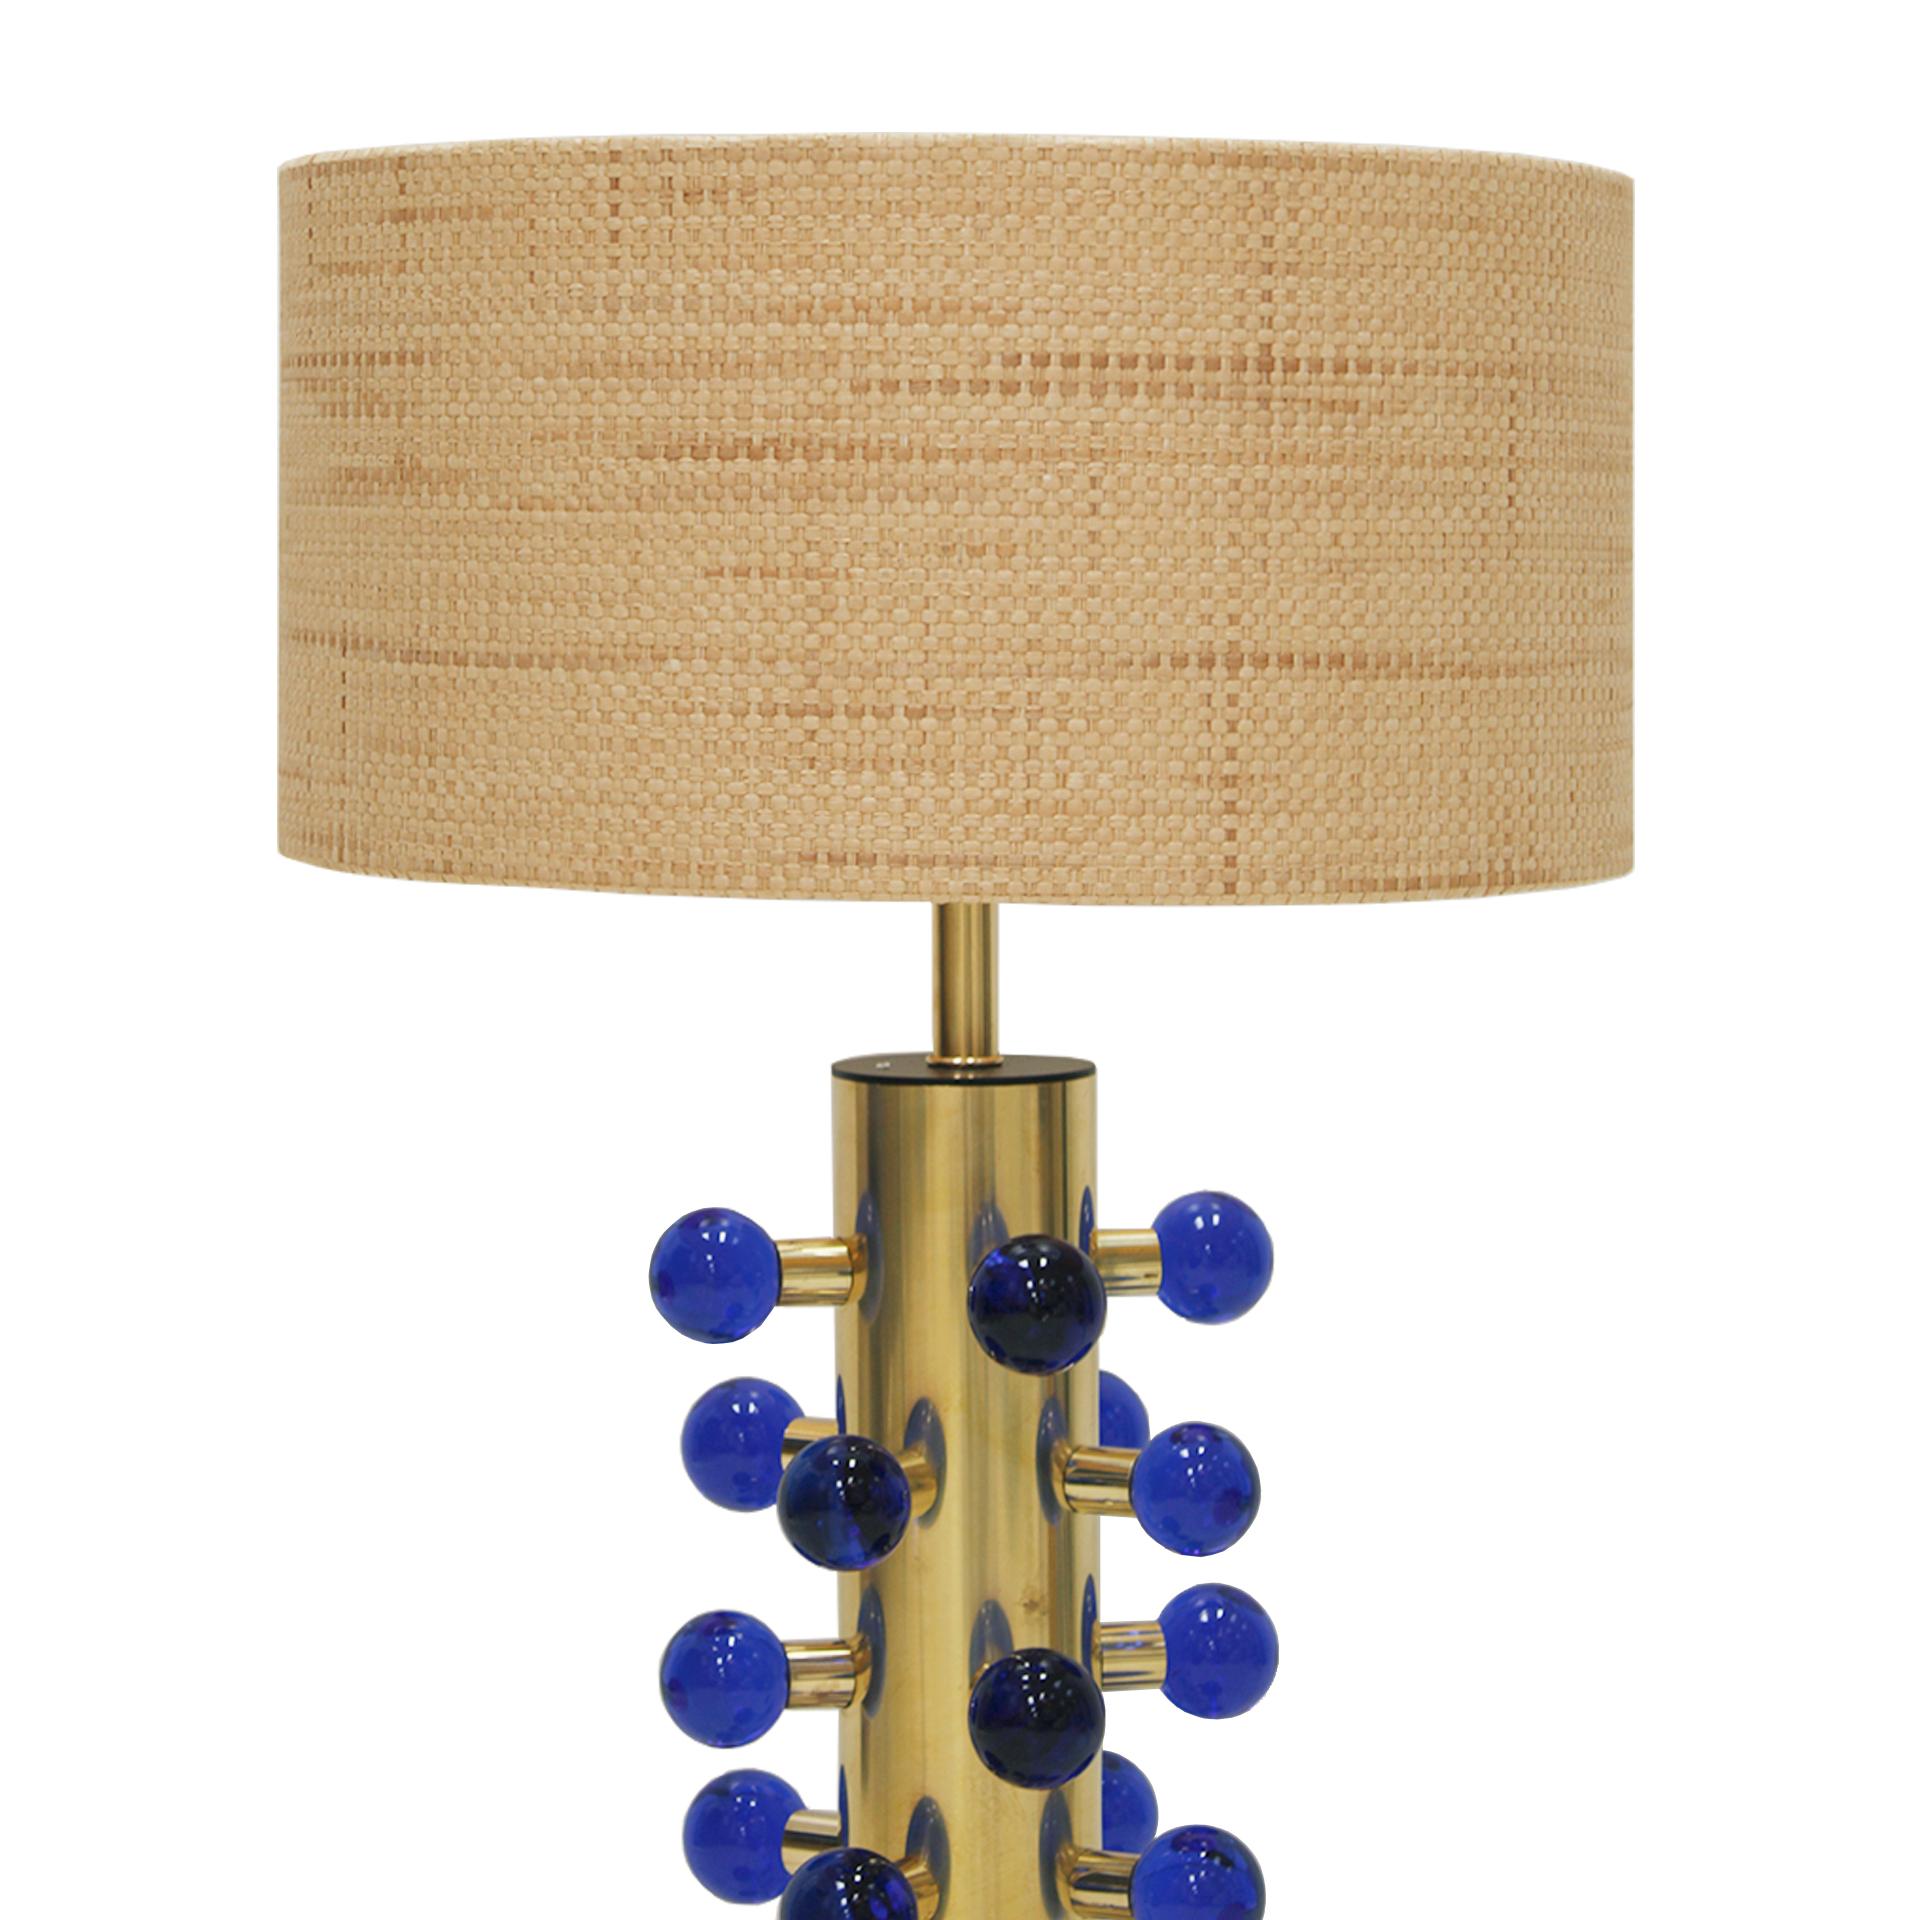 Italian L.A. Studio Contemporary Modern Murano Glass and Brass Pair of Table Lamps For Sale